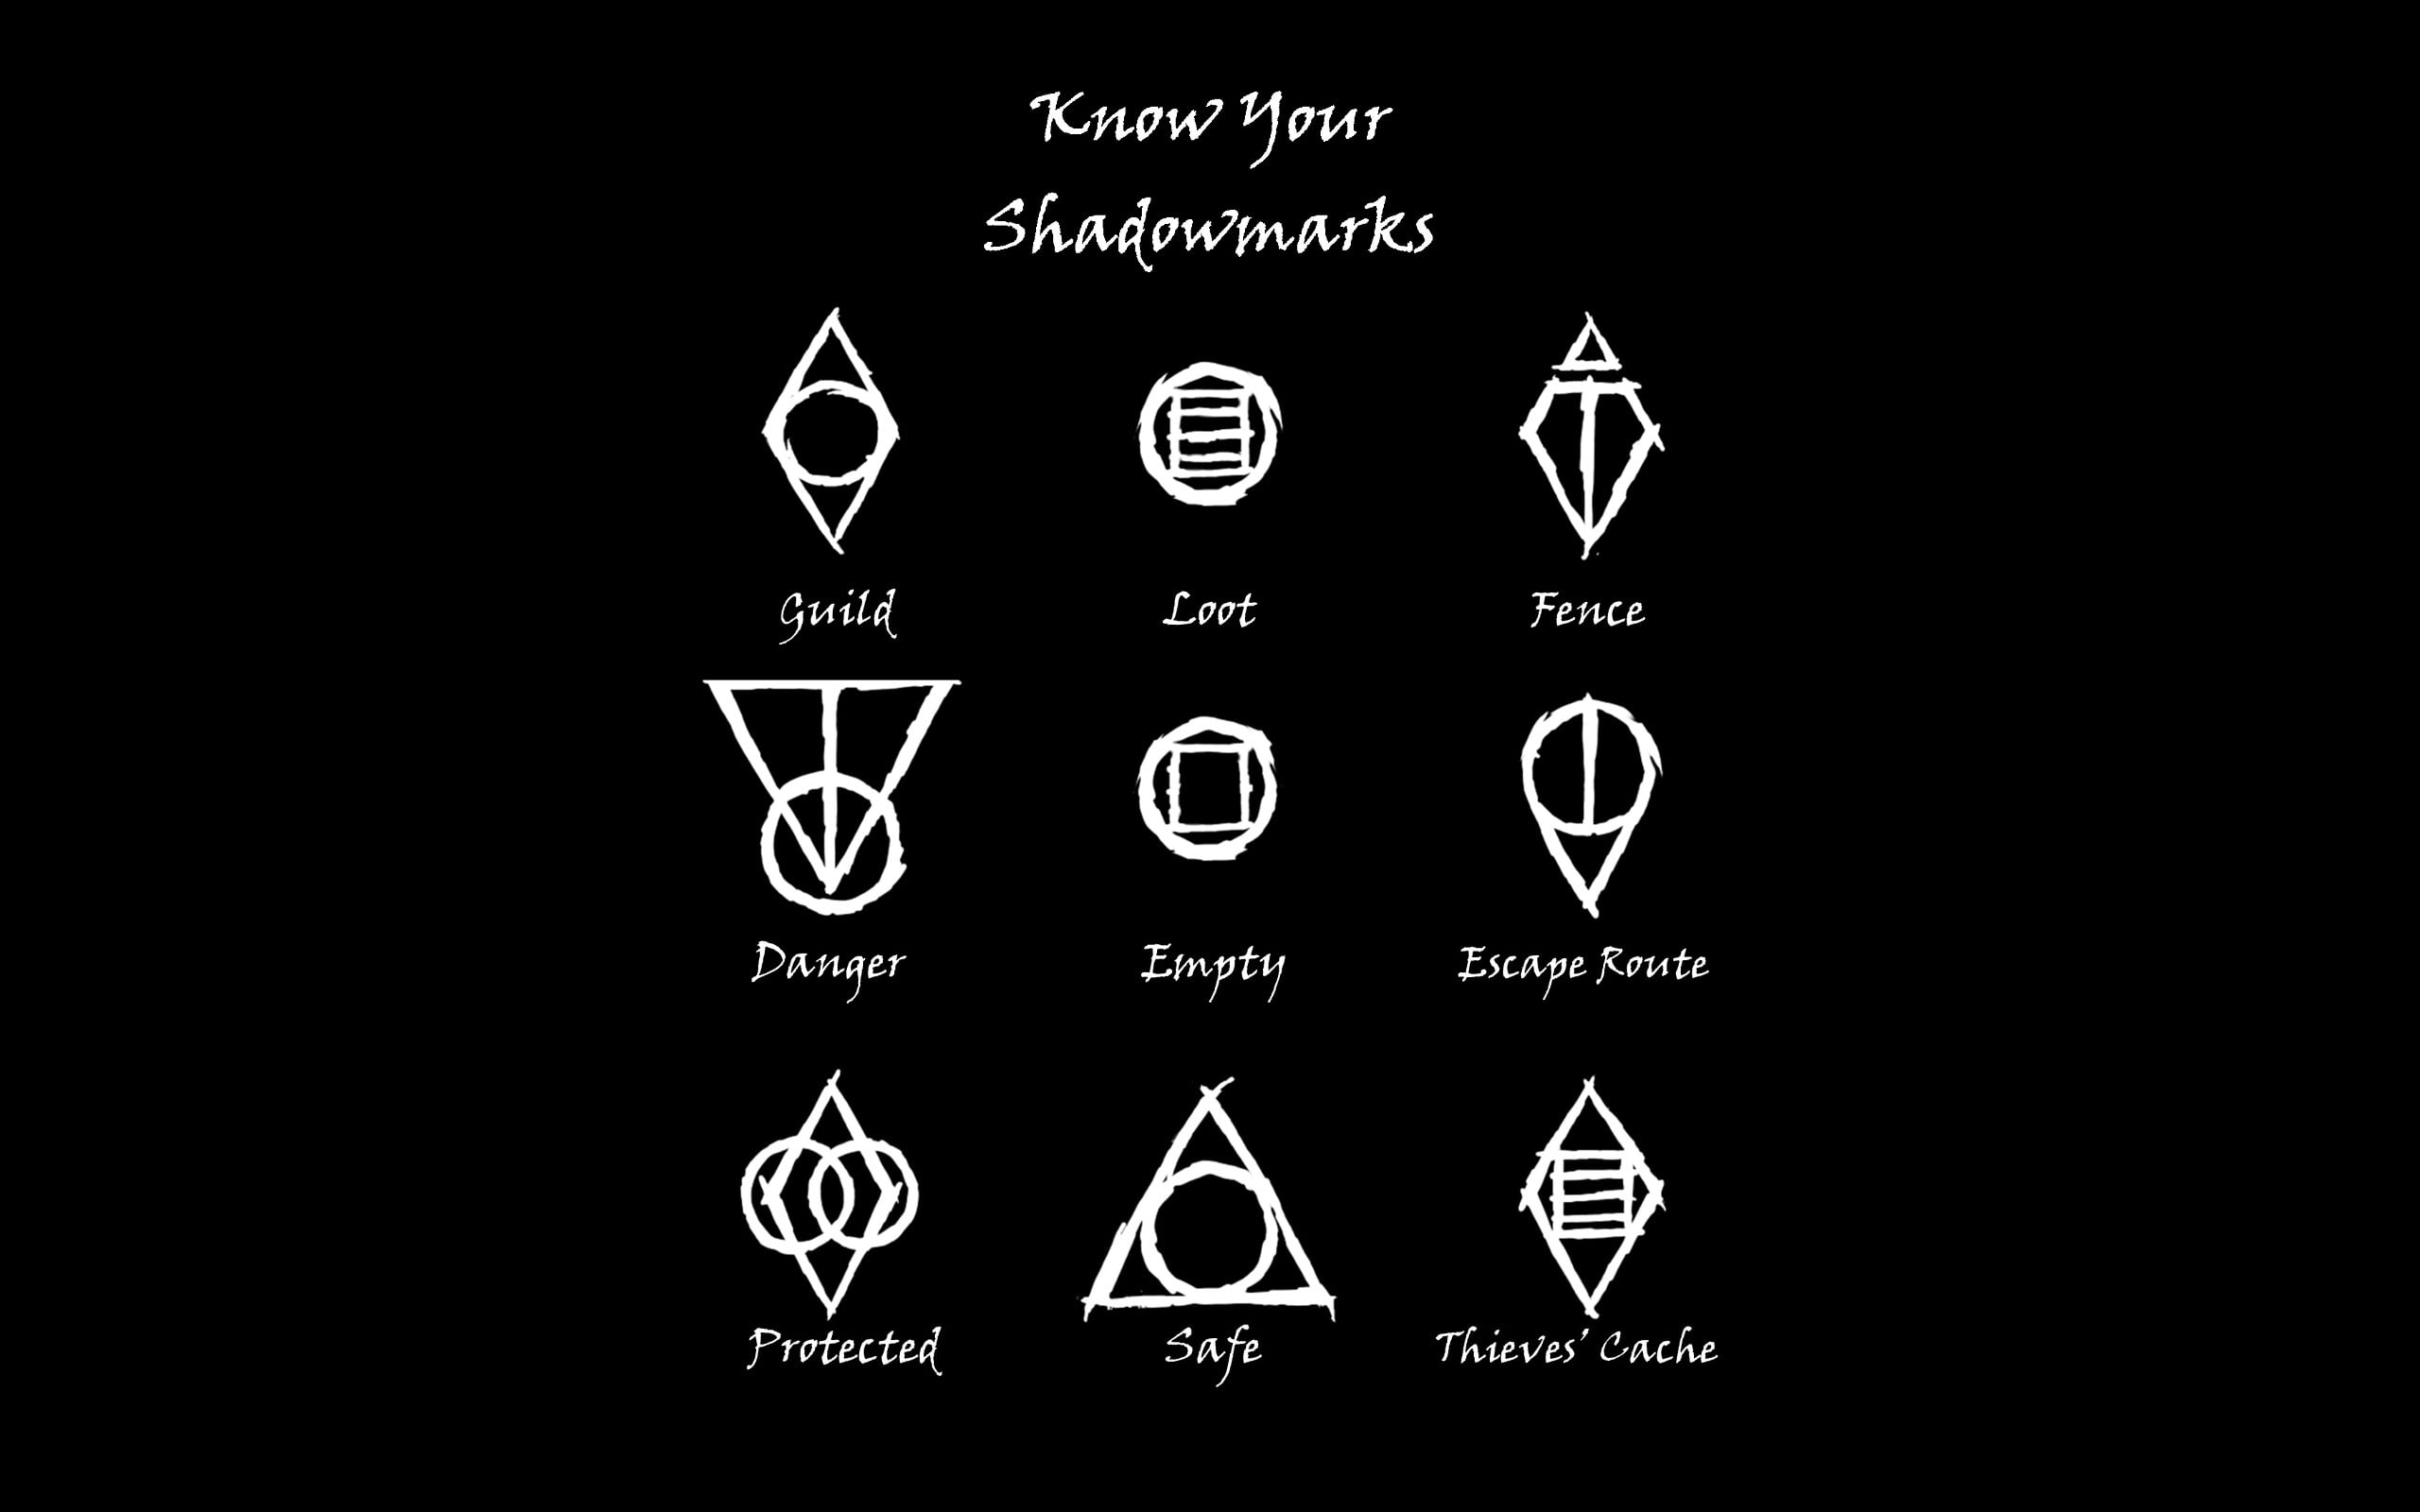 Know your shadowmarks illustration HD wallpaper